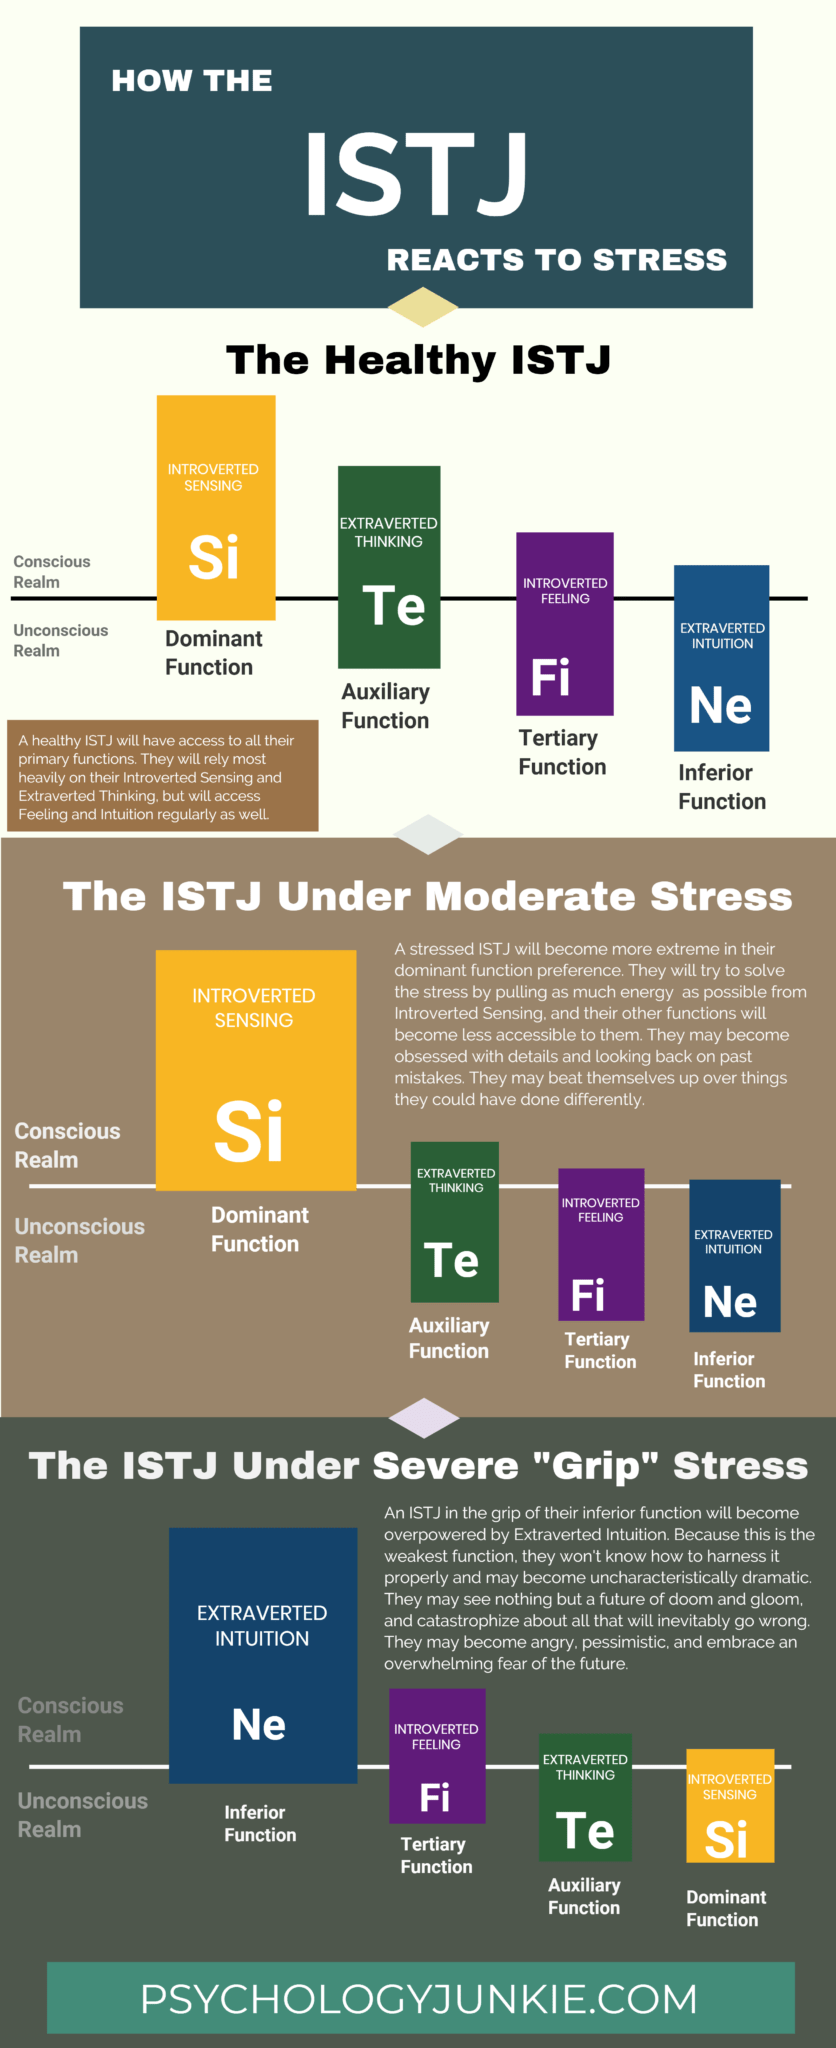 How do #ISTJs react to stress? Find out!